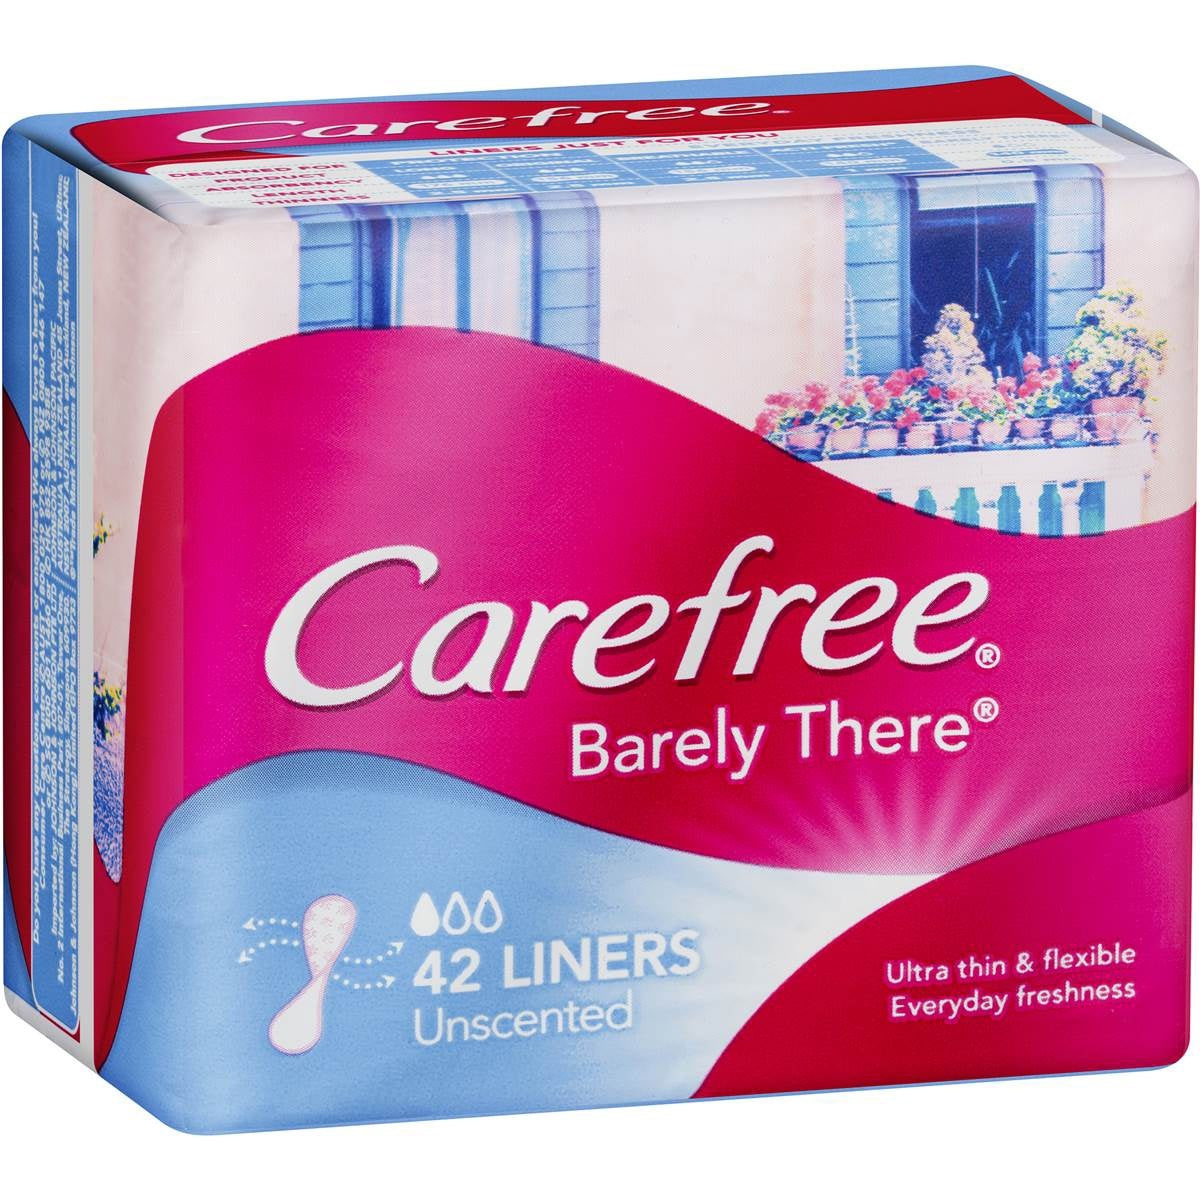 Carefree Barely There Scented Liners 42pk